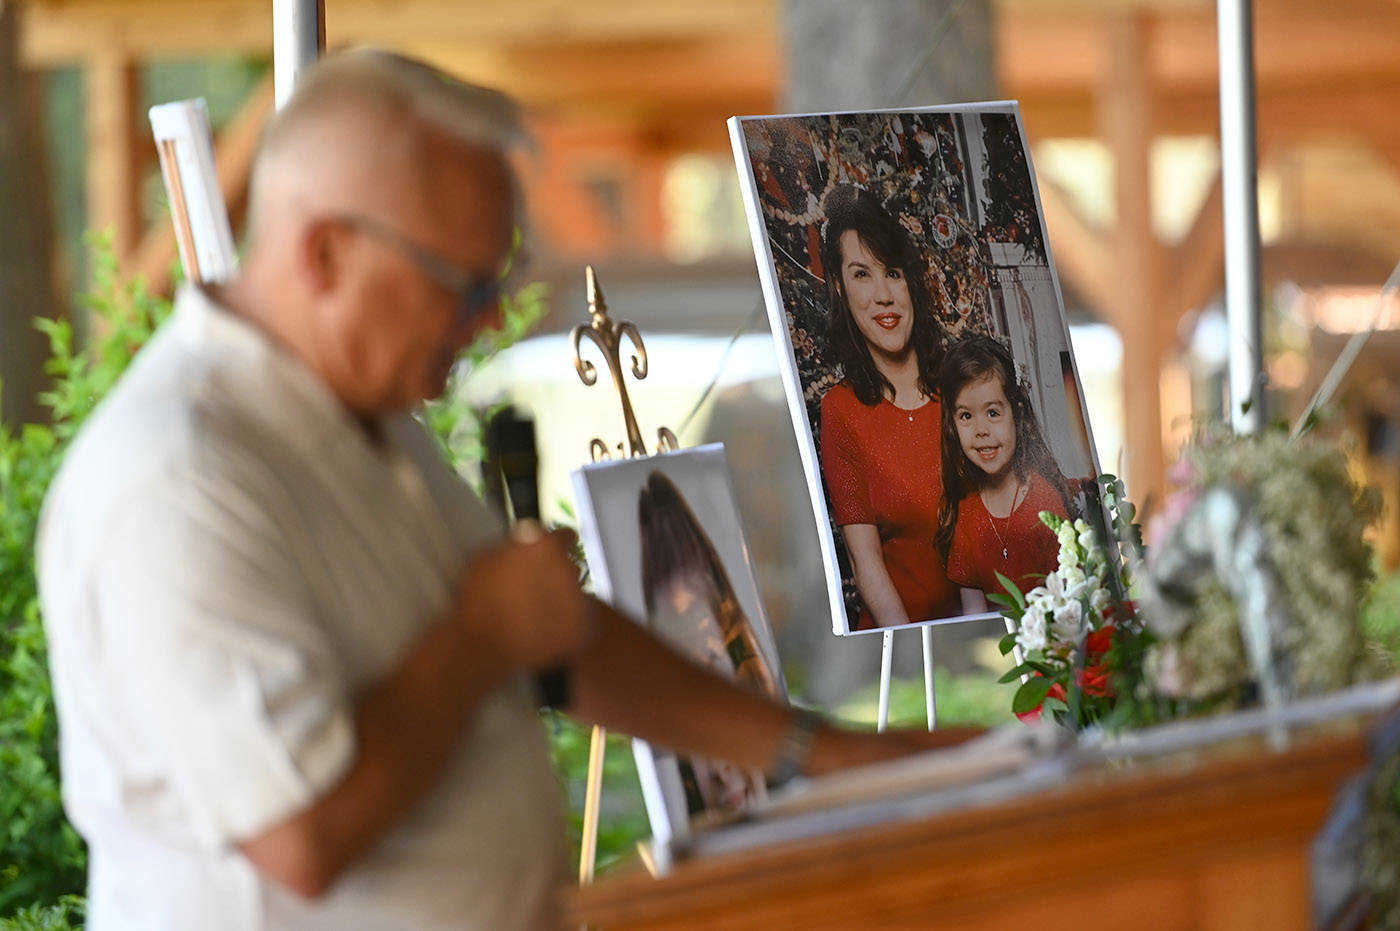 A photo of Shaelene Bell when she was a child with her mother, Alina Durham, sits on a table during Bells celebration of life at Sandpiper Resort on Saturday, June 26, 2021. (Jenna Hauck/ Chilliwack Progress)